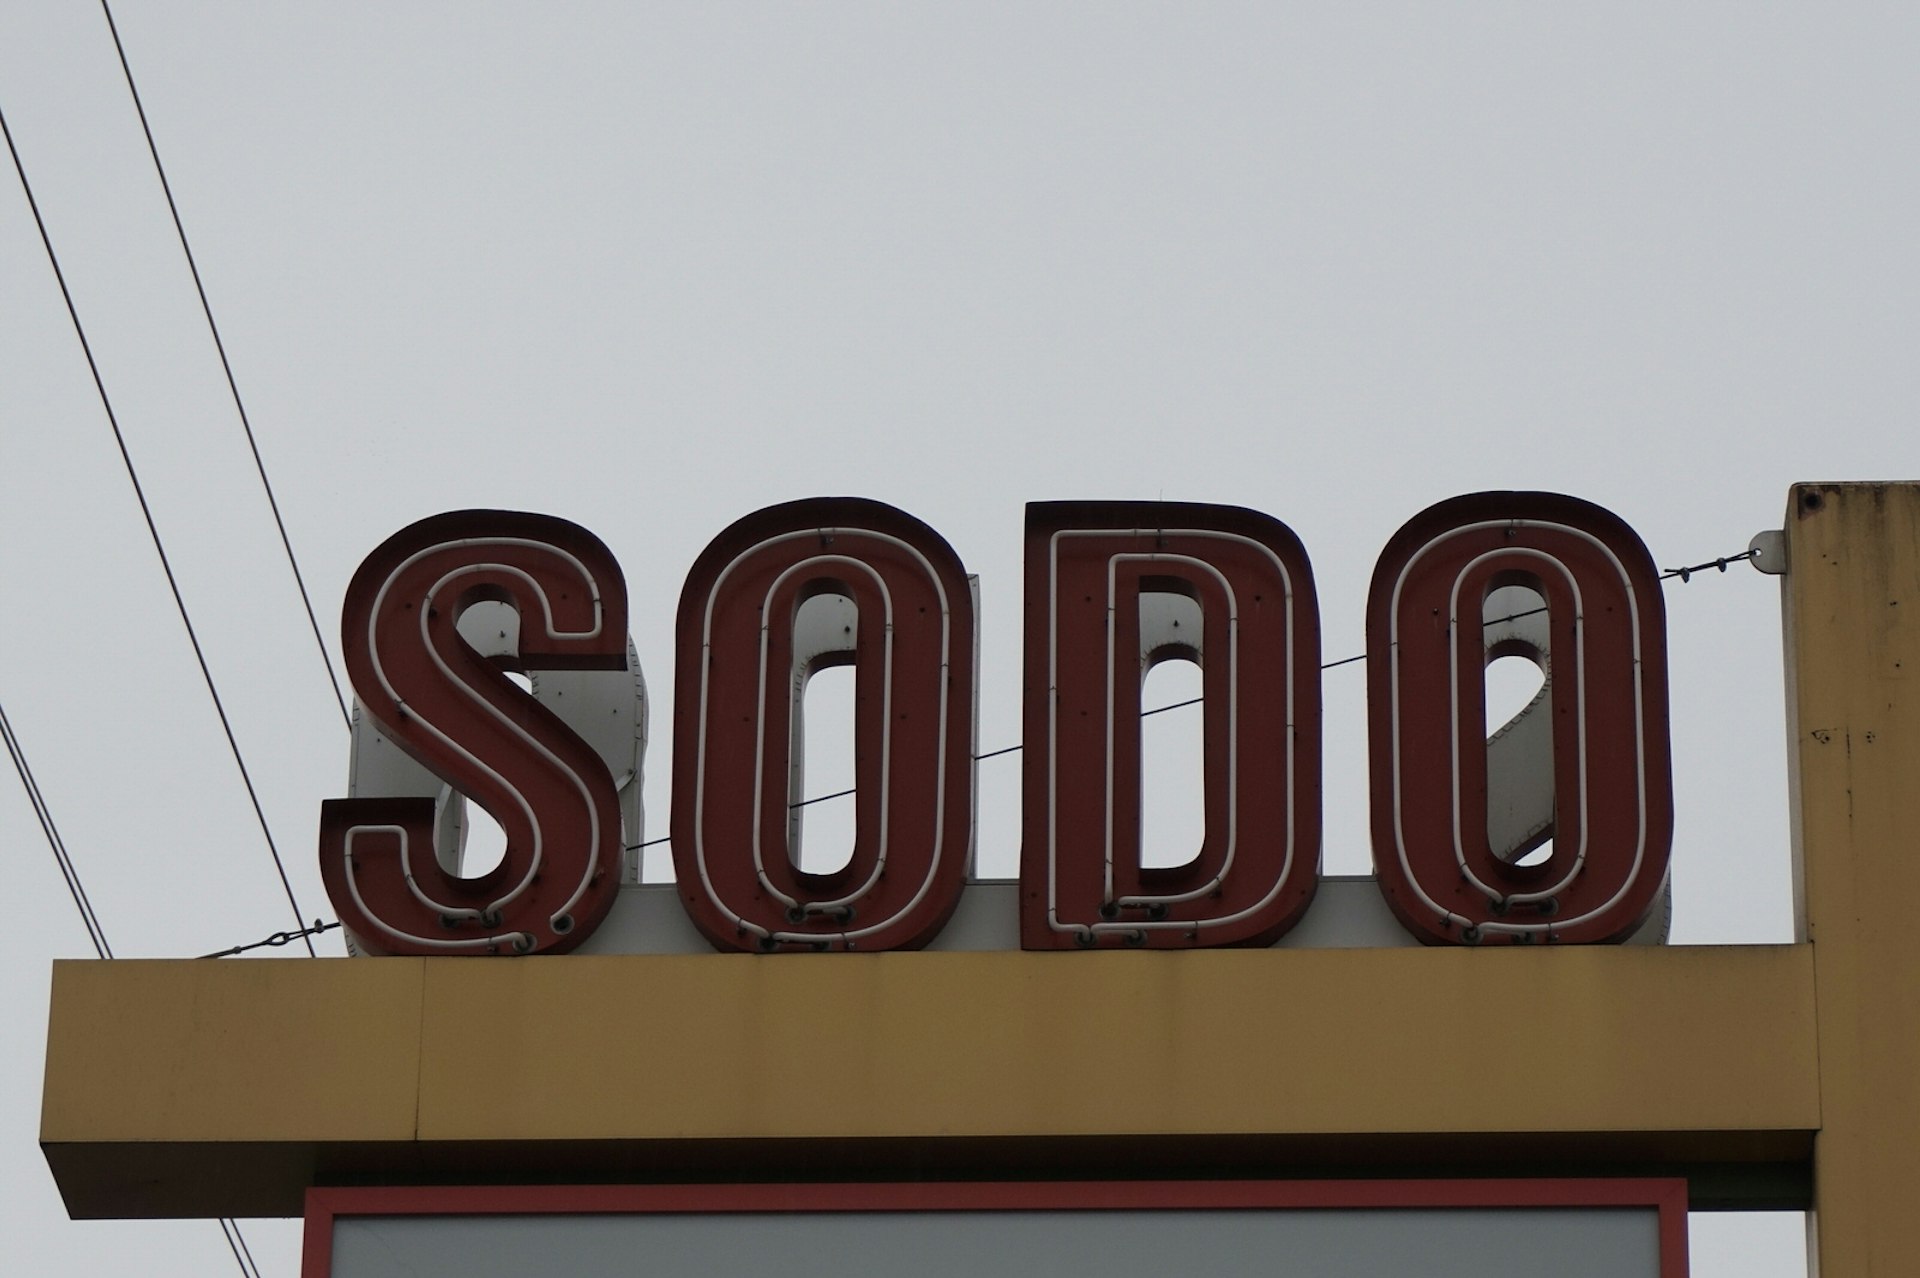 The yellow and red sign for the SoDo district in Seattle© Brendan Sainsbury / Lonely Planet 